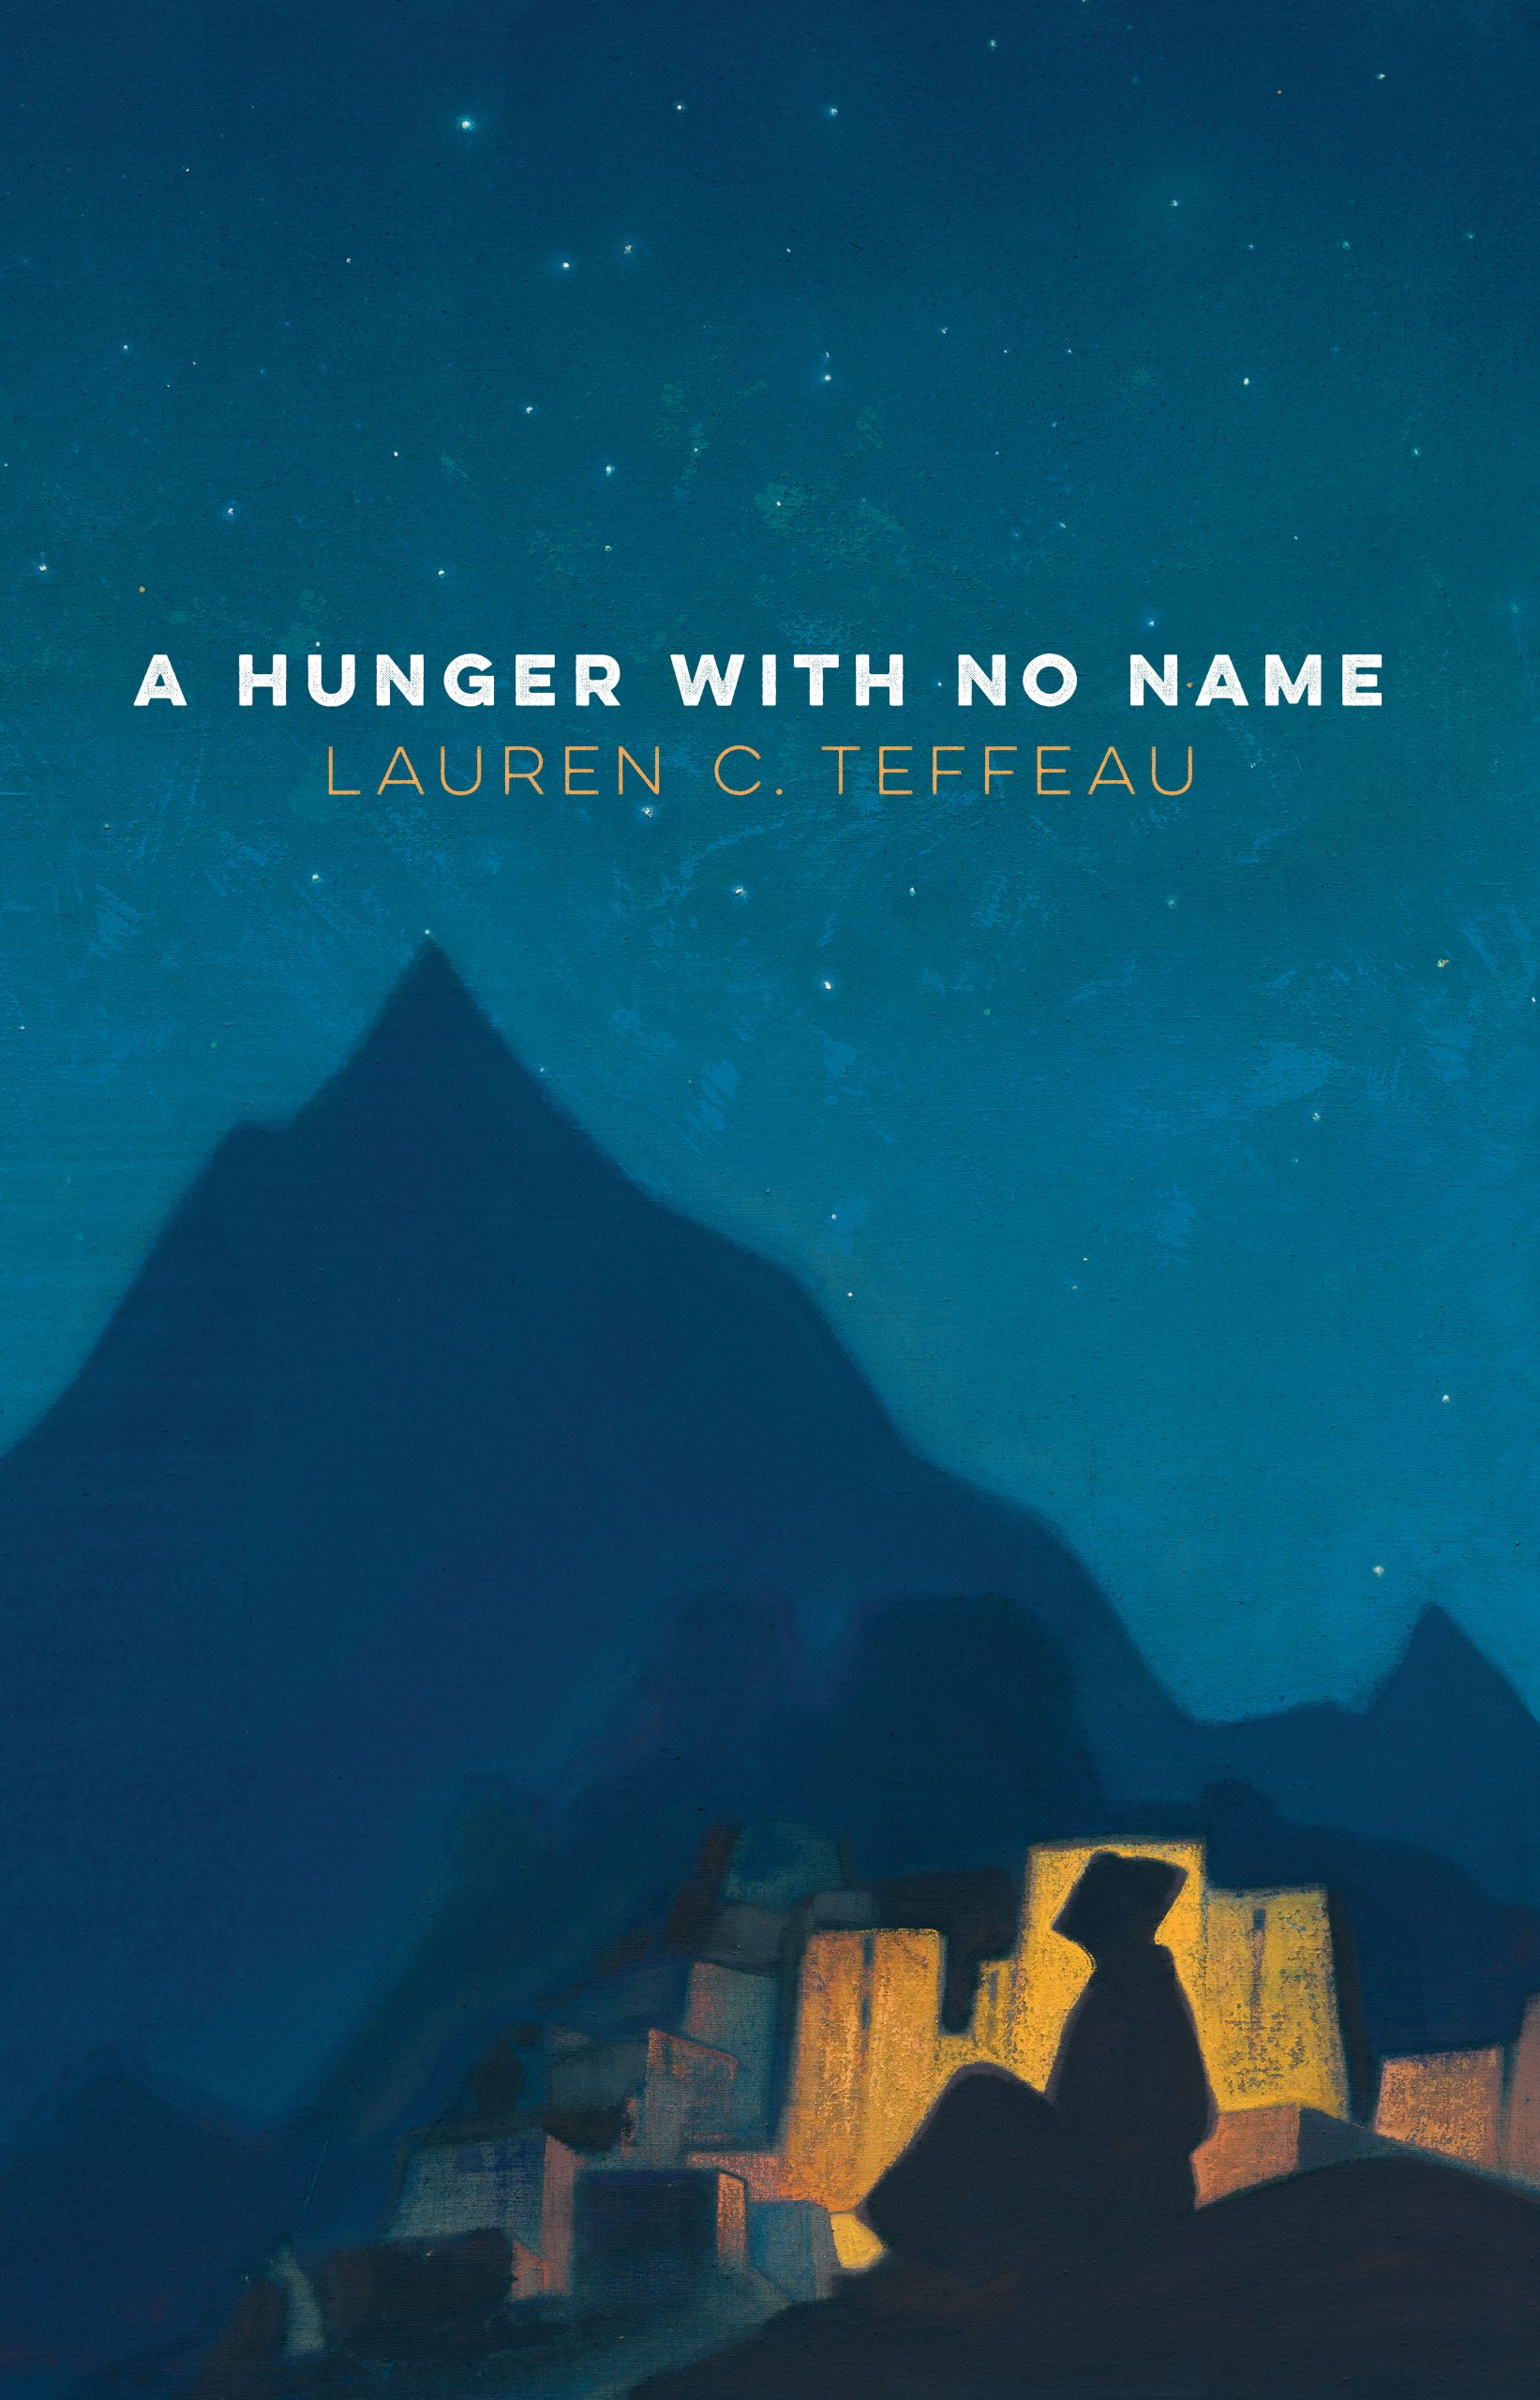 Image of the front cover of A Hunger With No Name.